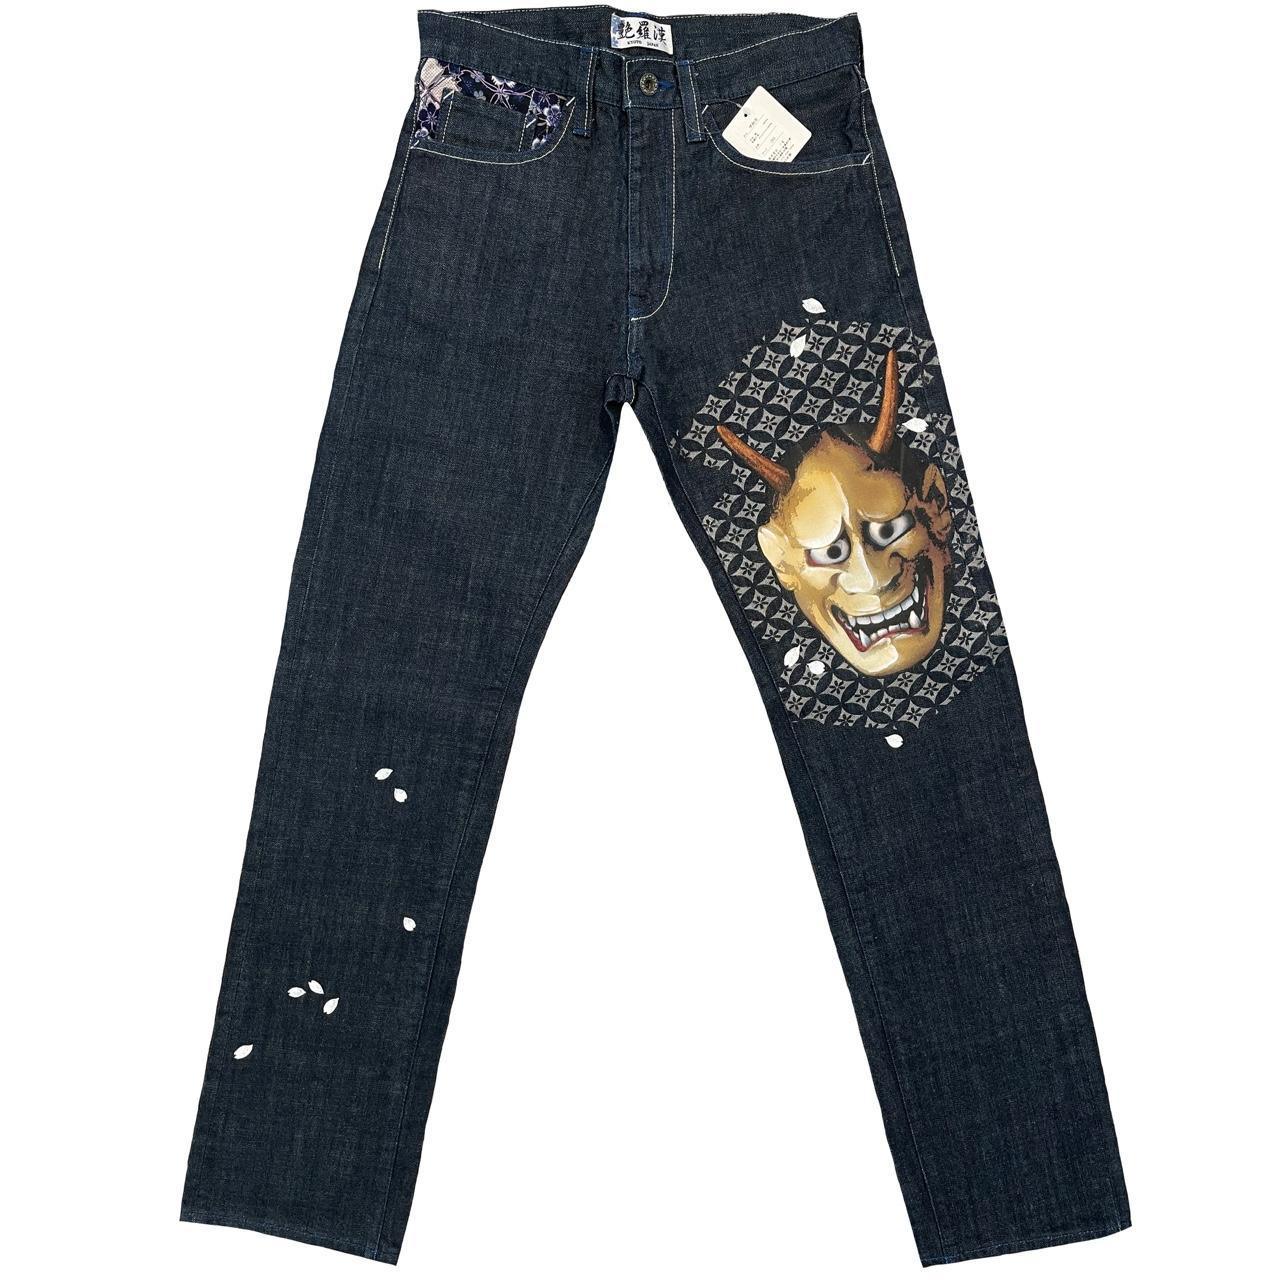 Kyoto Airbrushed Jeans - Known Source